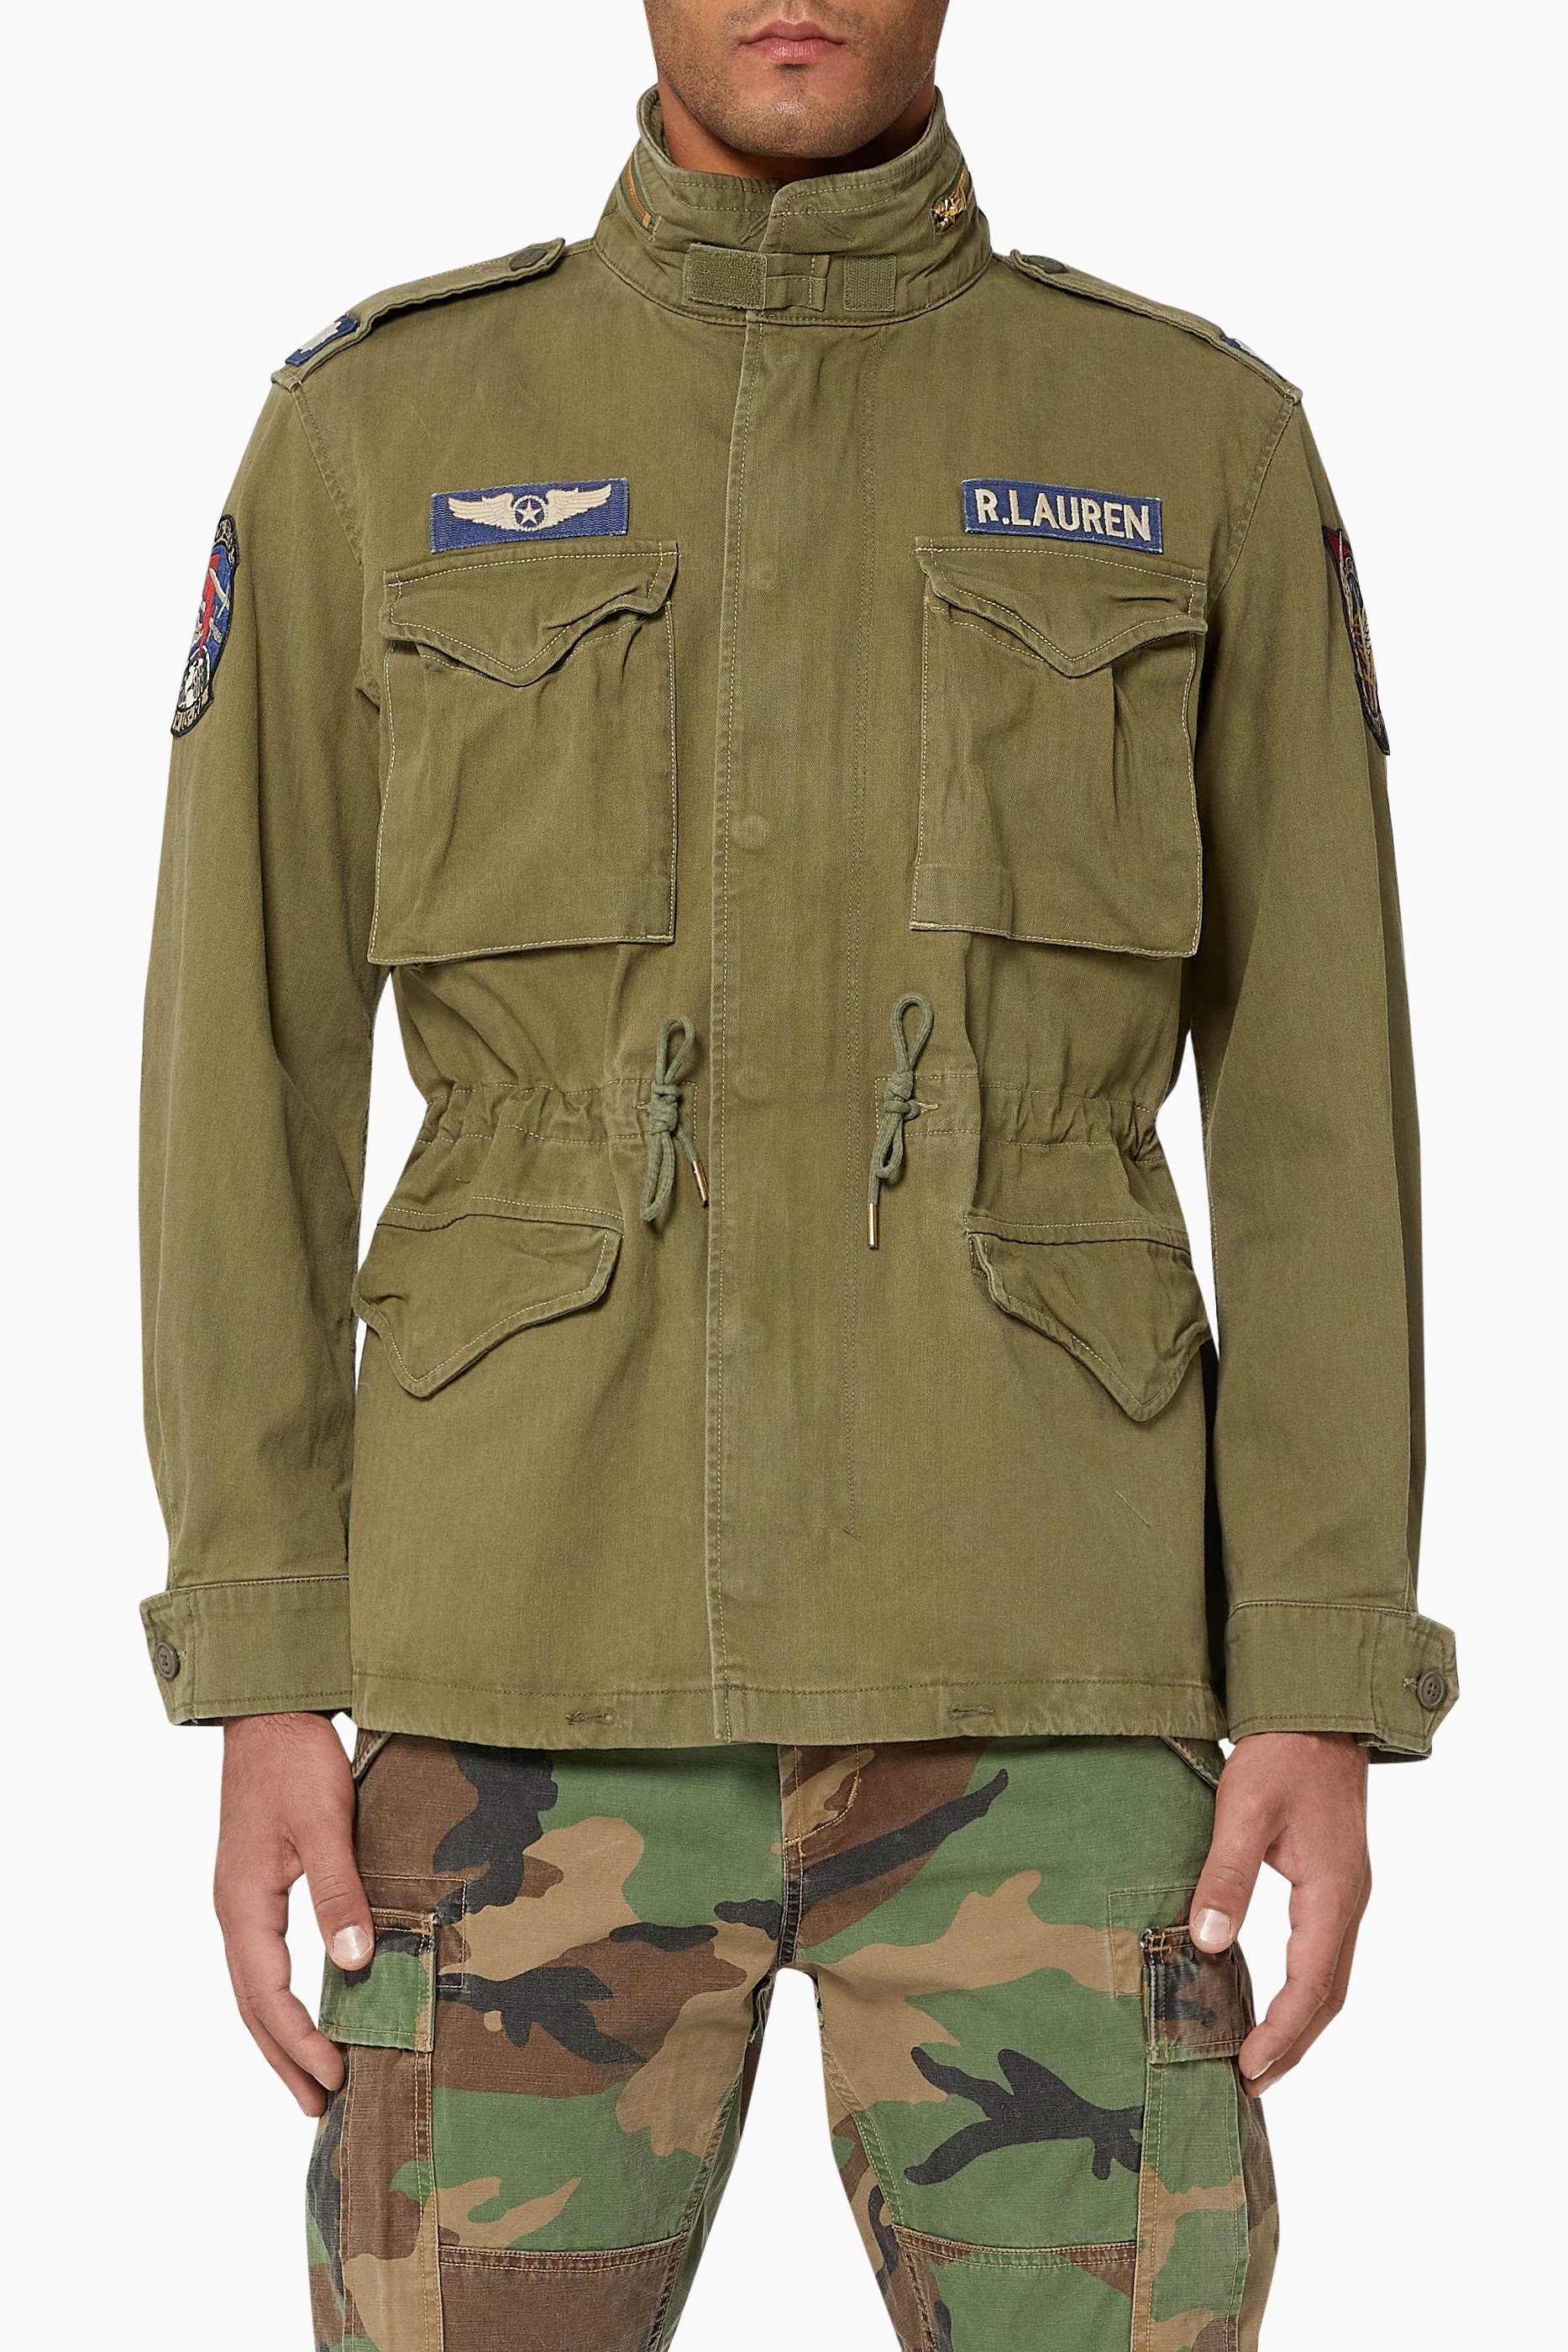 New Polo RALPH LAUREN Combat/Military/Field/Patches Cotton Twill